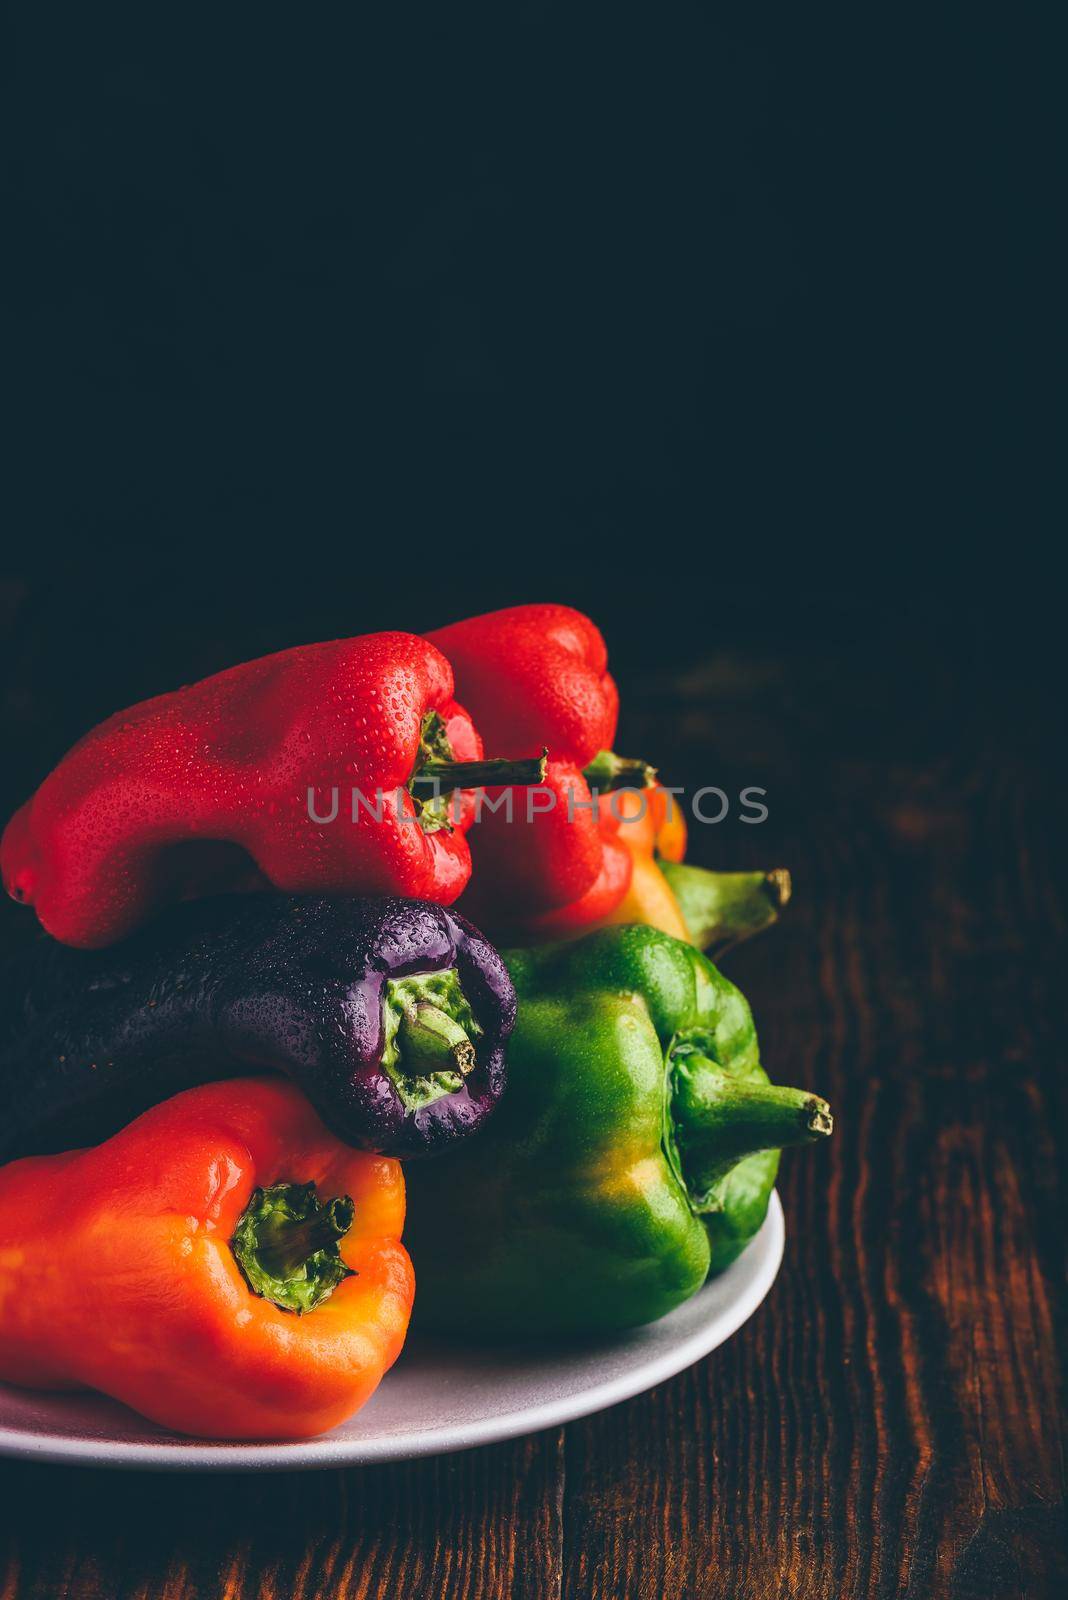 Multicolored fresh bell peppers on plate over wooden background